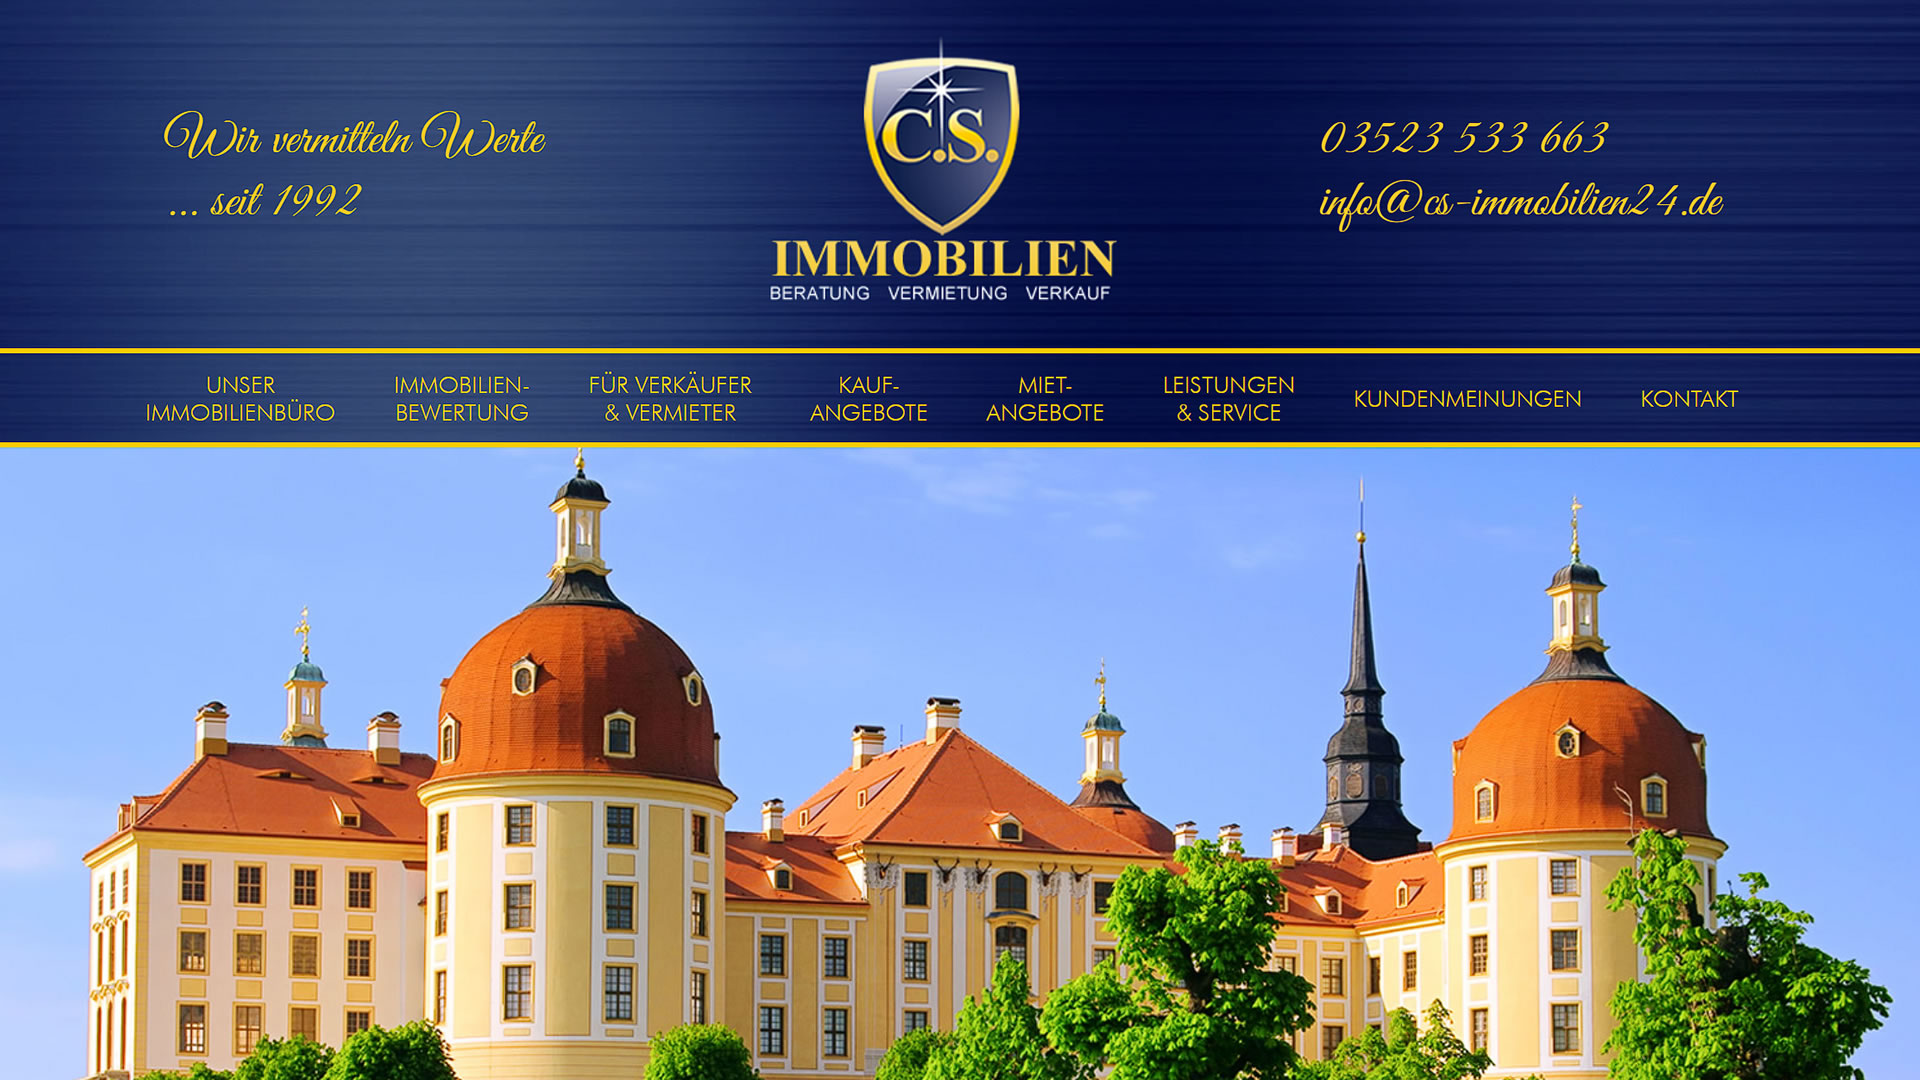 Webseite C.S. Immobilien